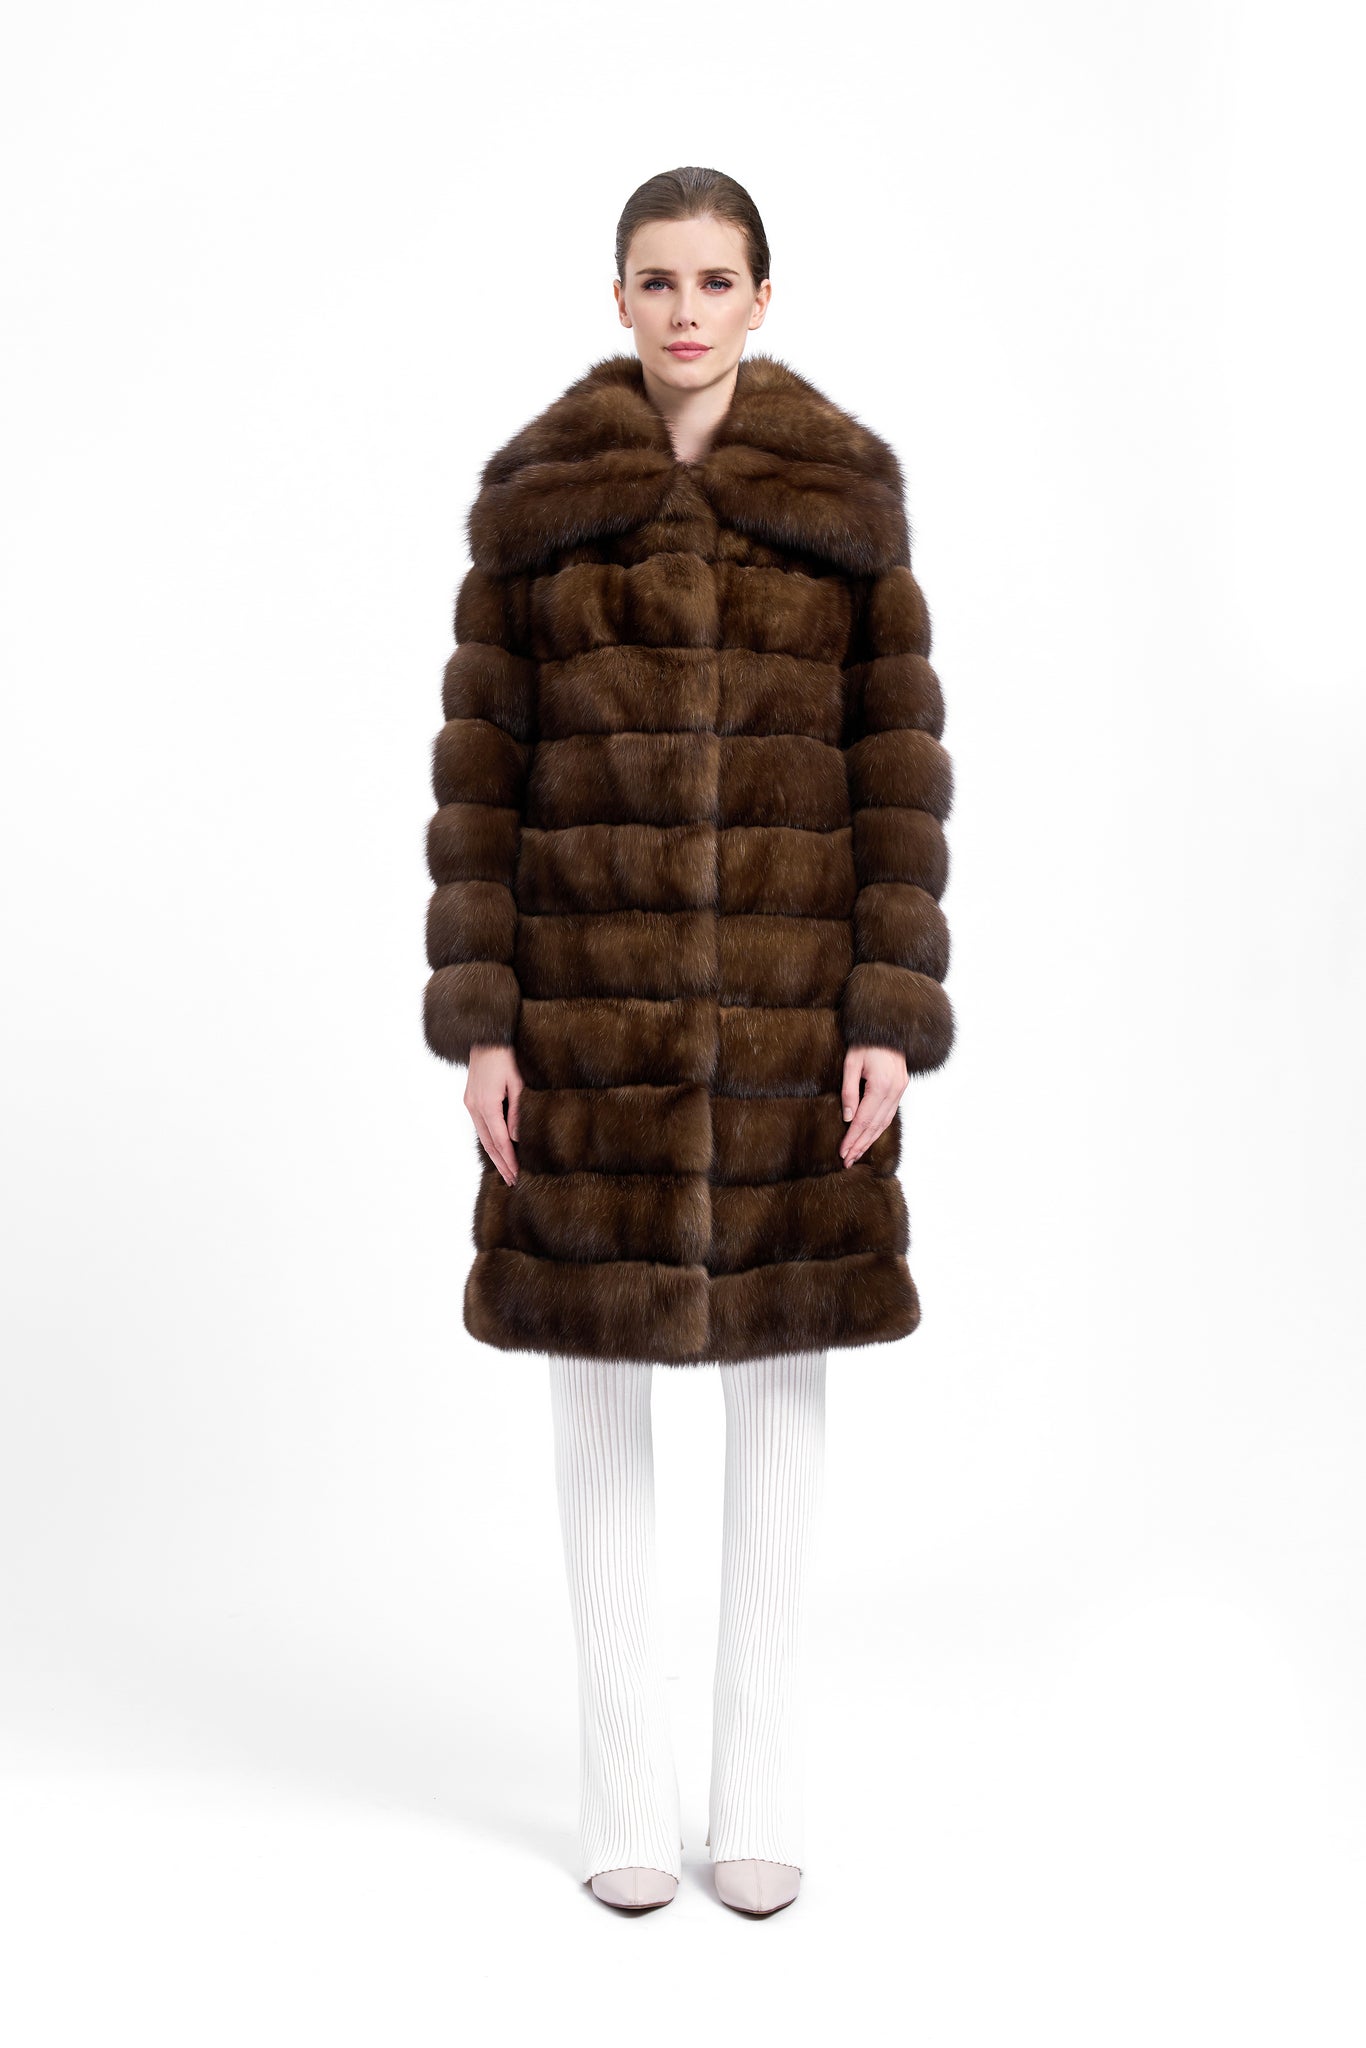 Luxurious Long Sable Fur Coat with Button Closure for Women in Winter Fashion